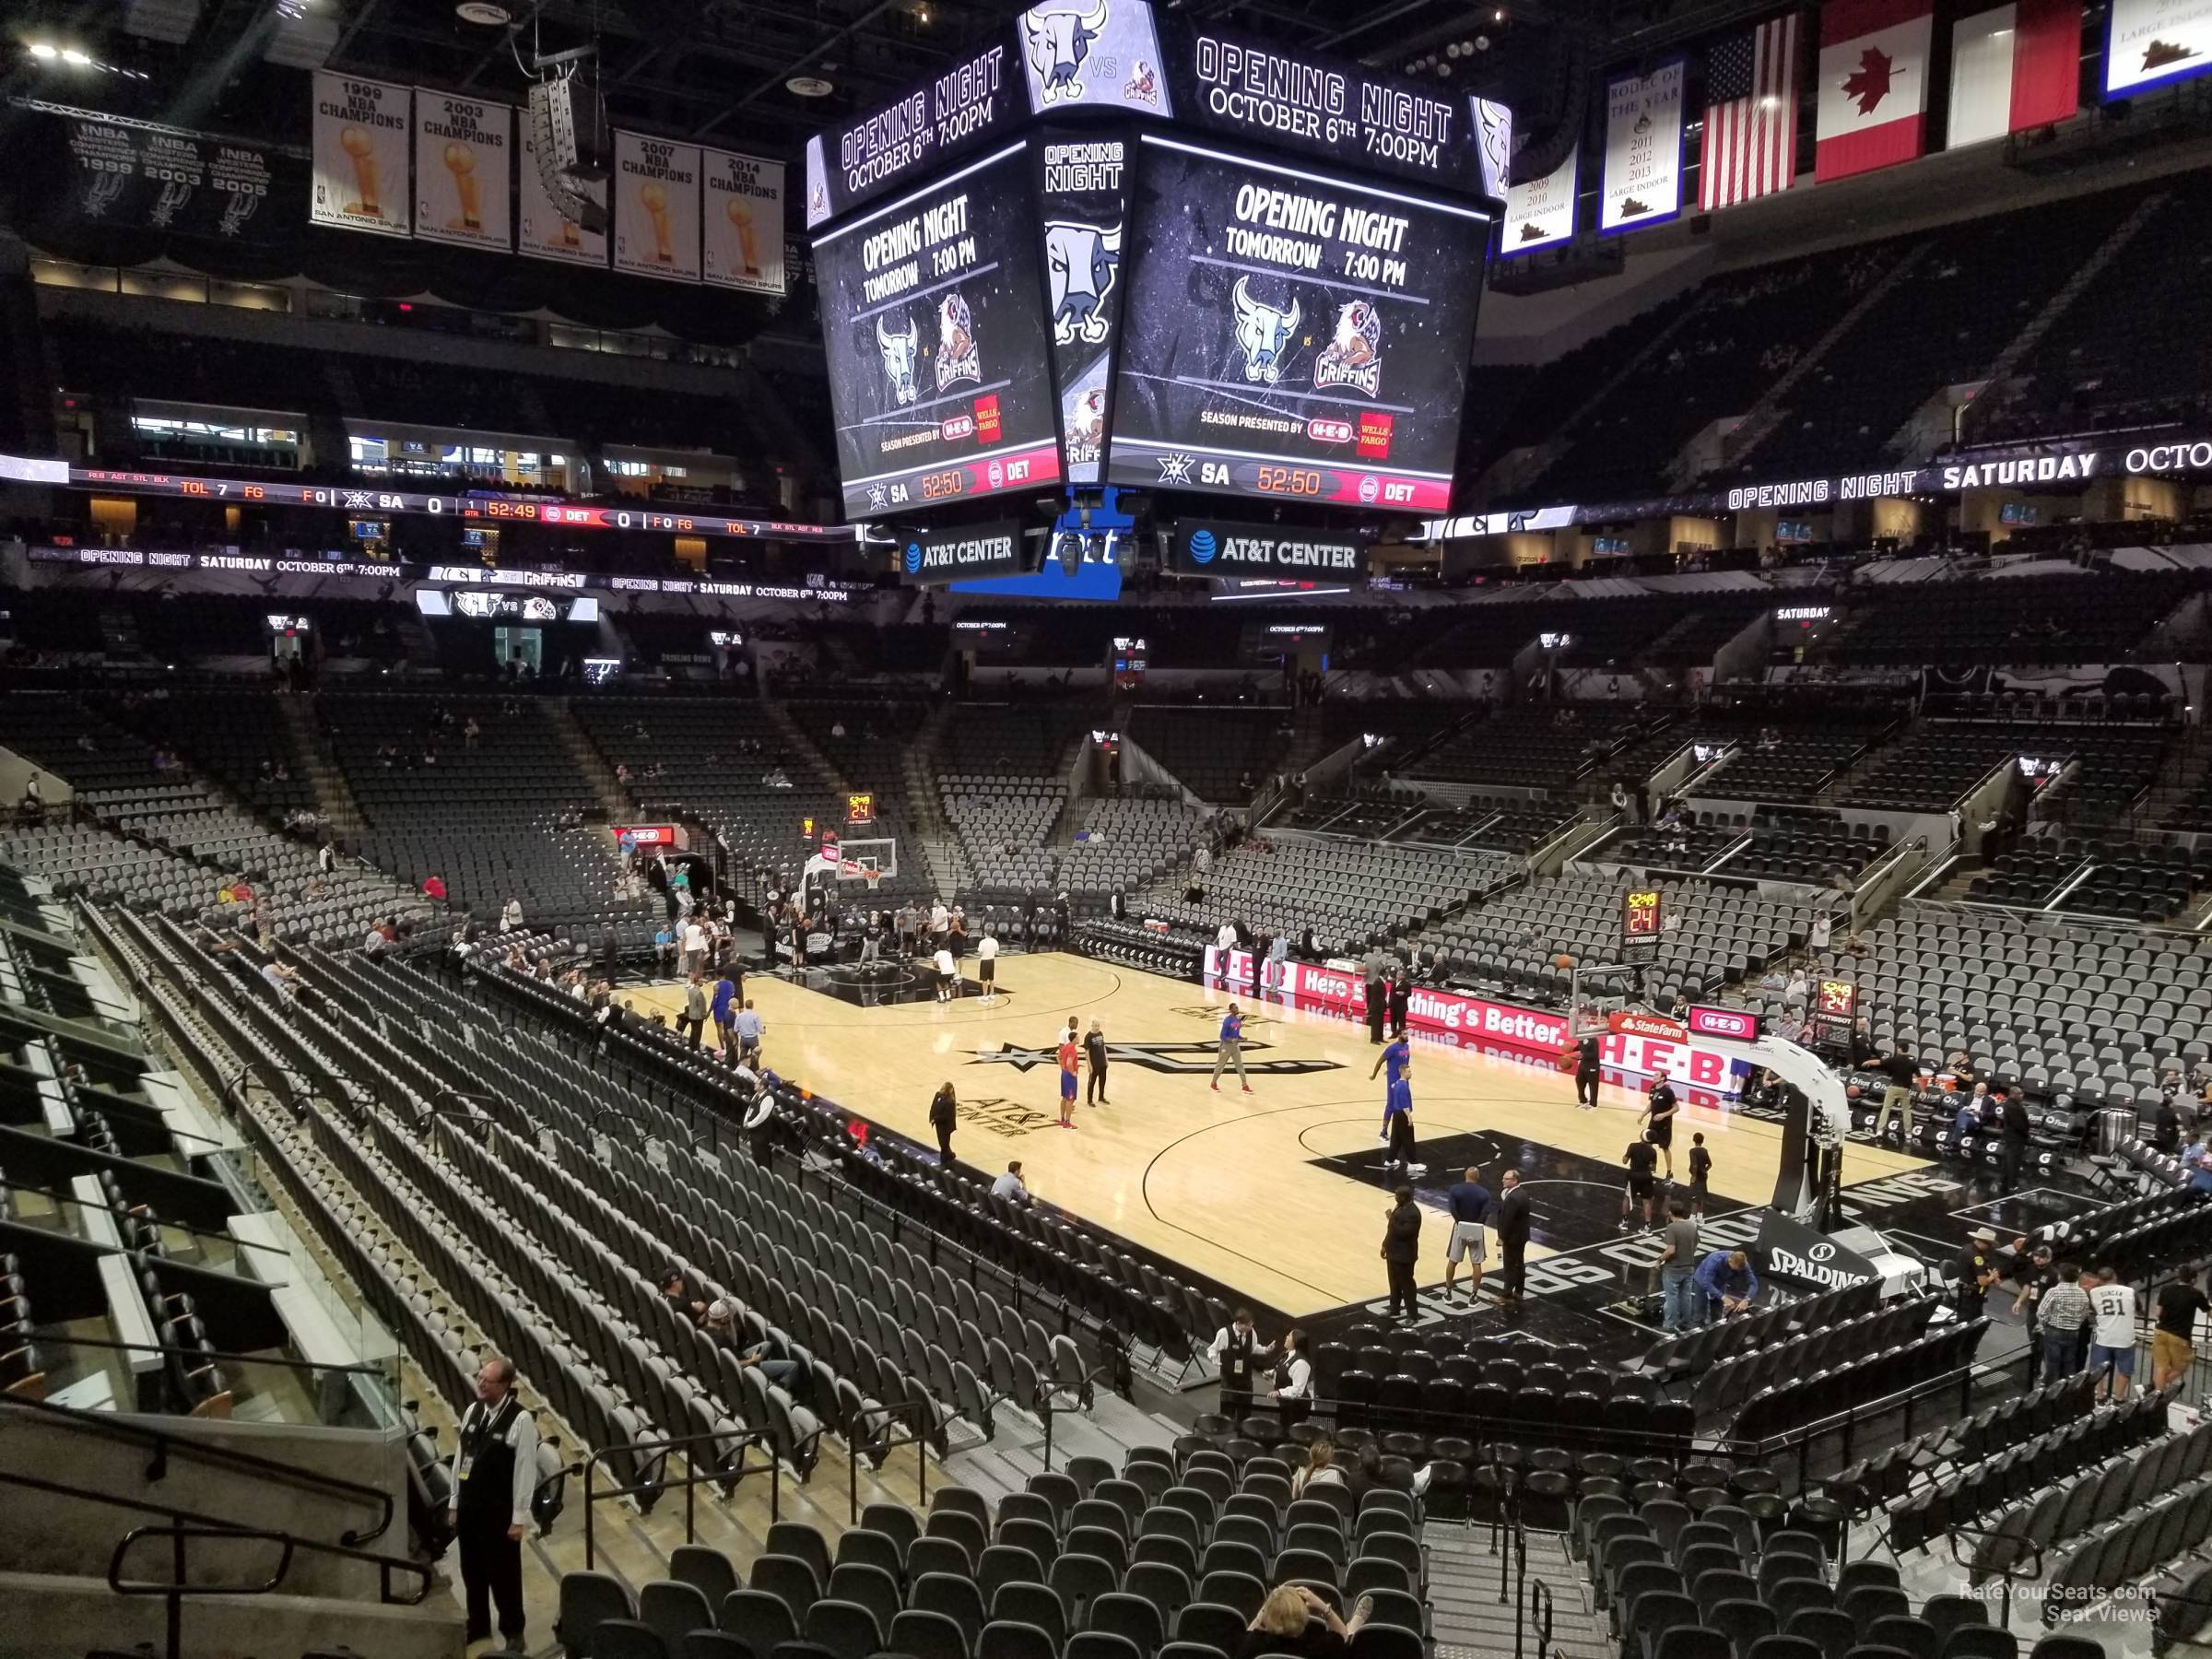 section 118, row 25 seat view  for basketball - at&t center